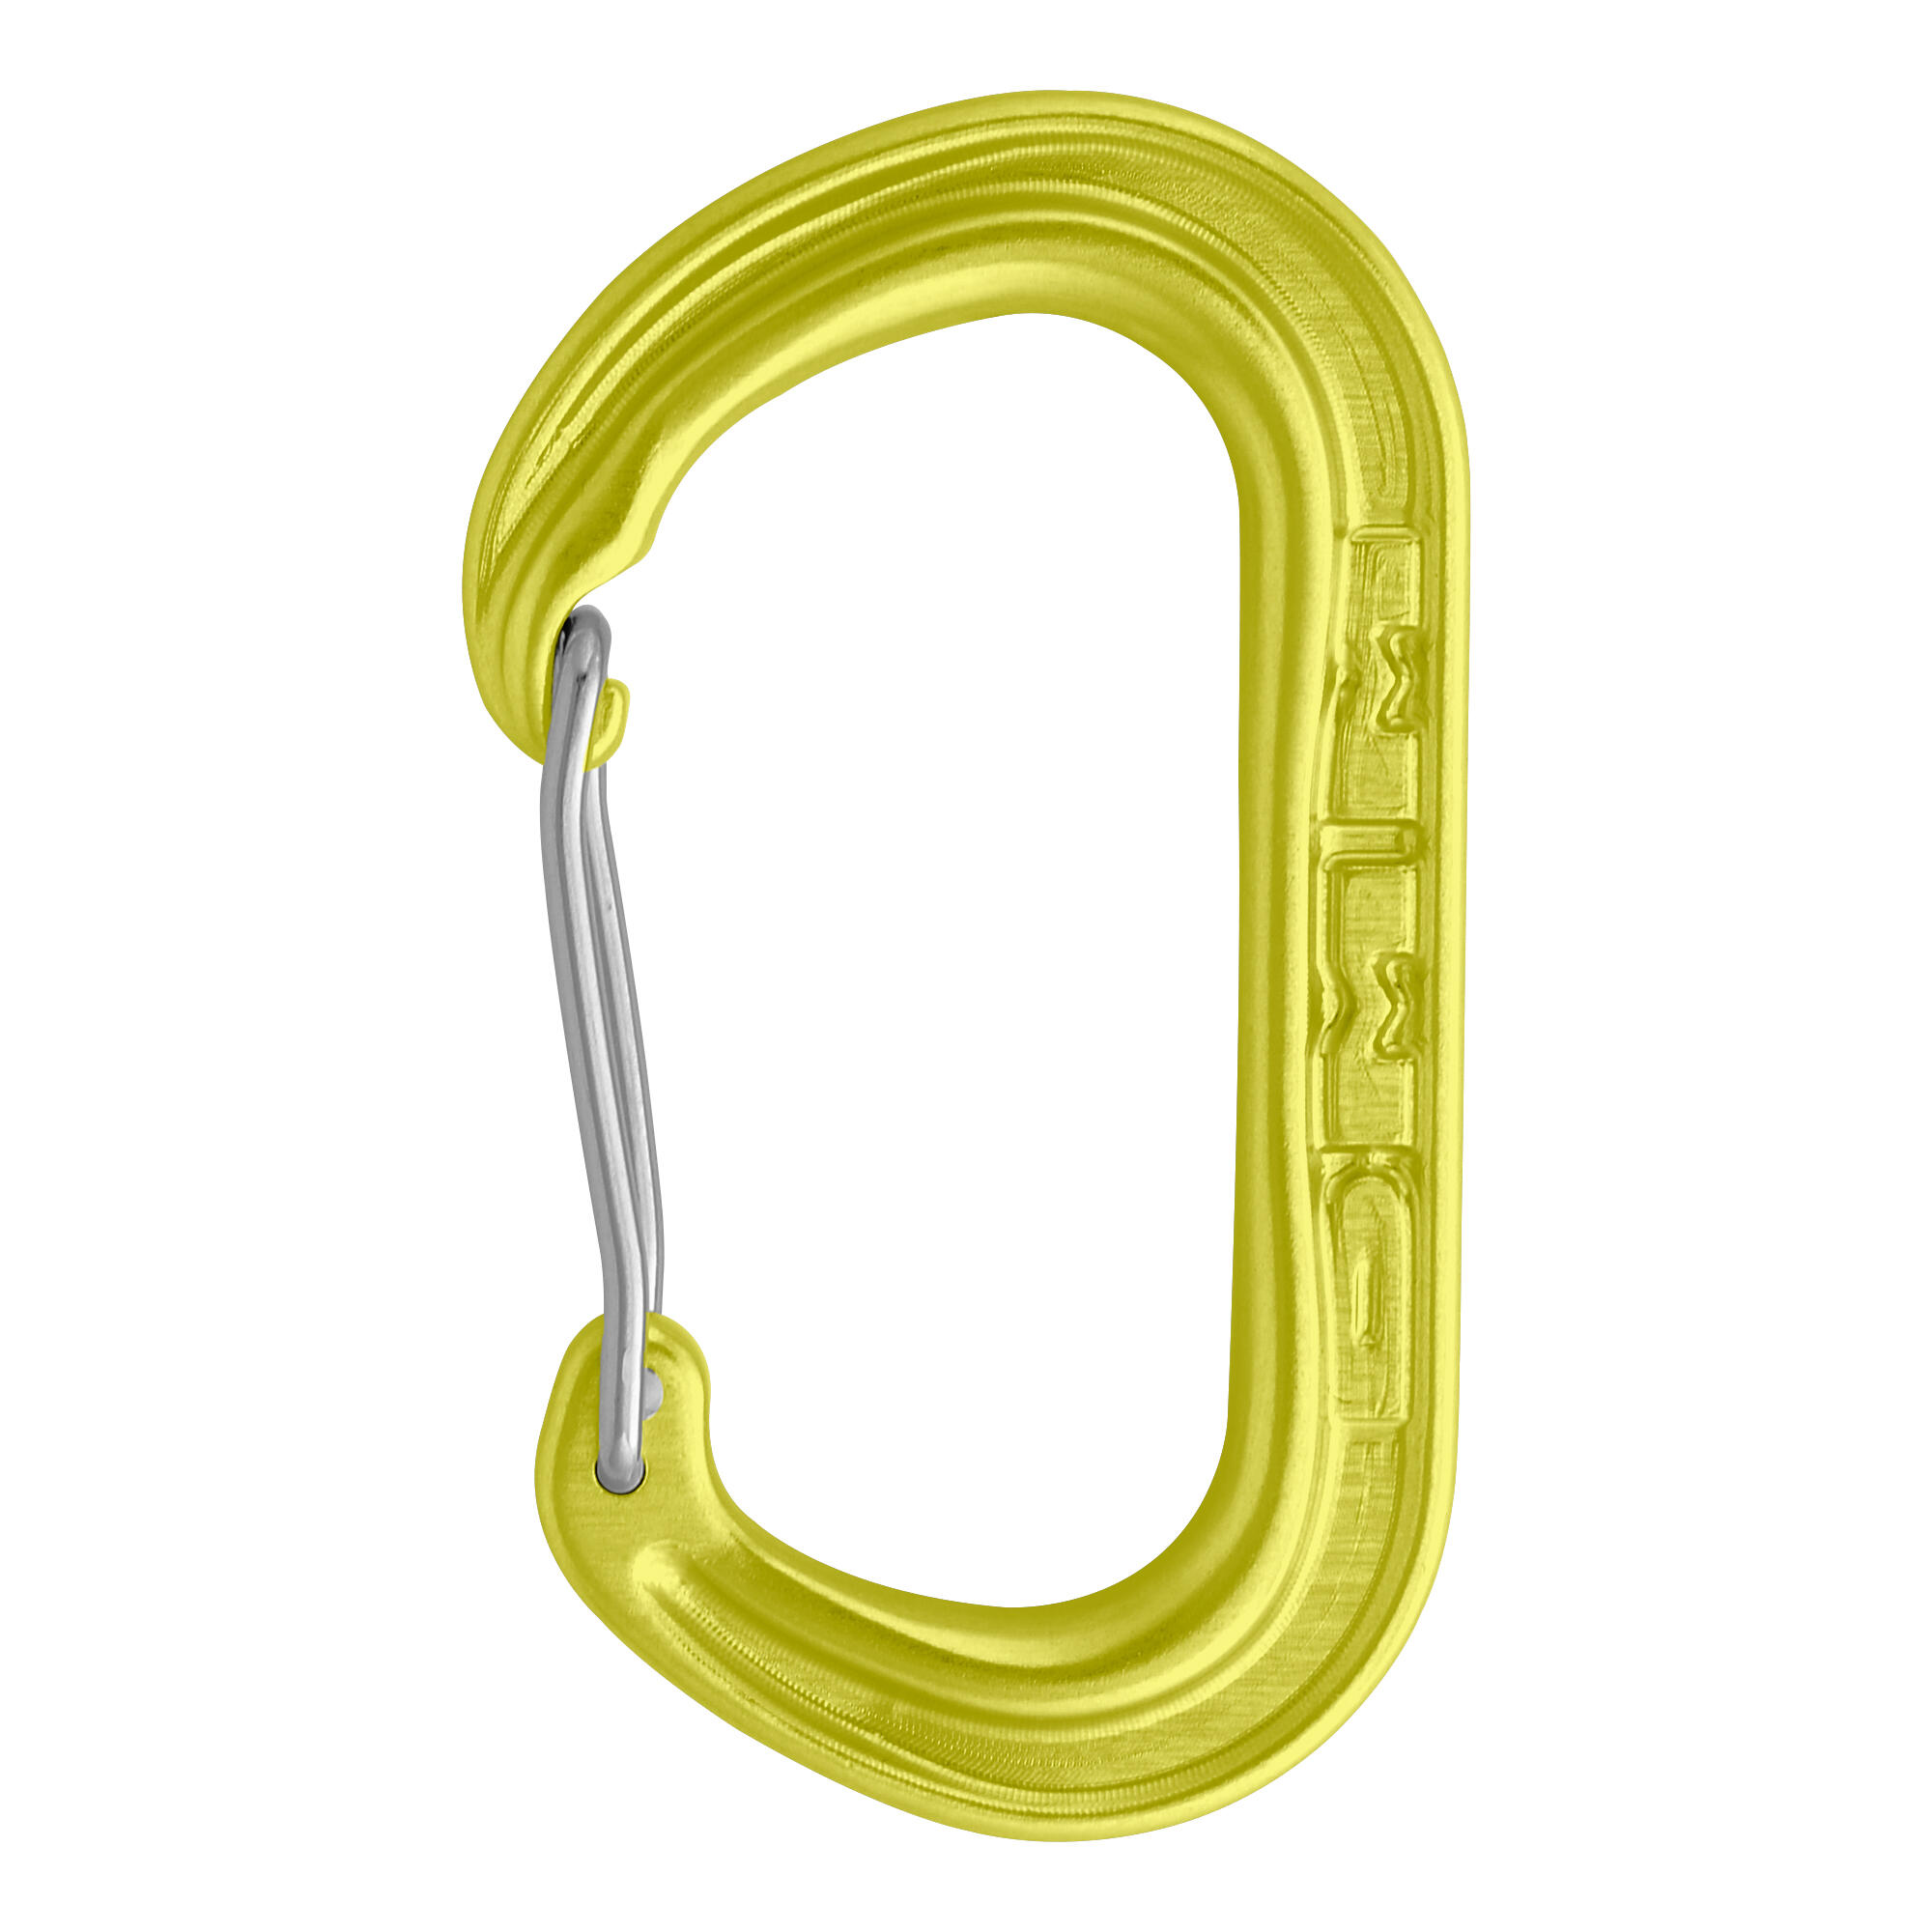 DMM XSRE Wire Accessory Carabiner - Lime